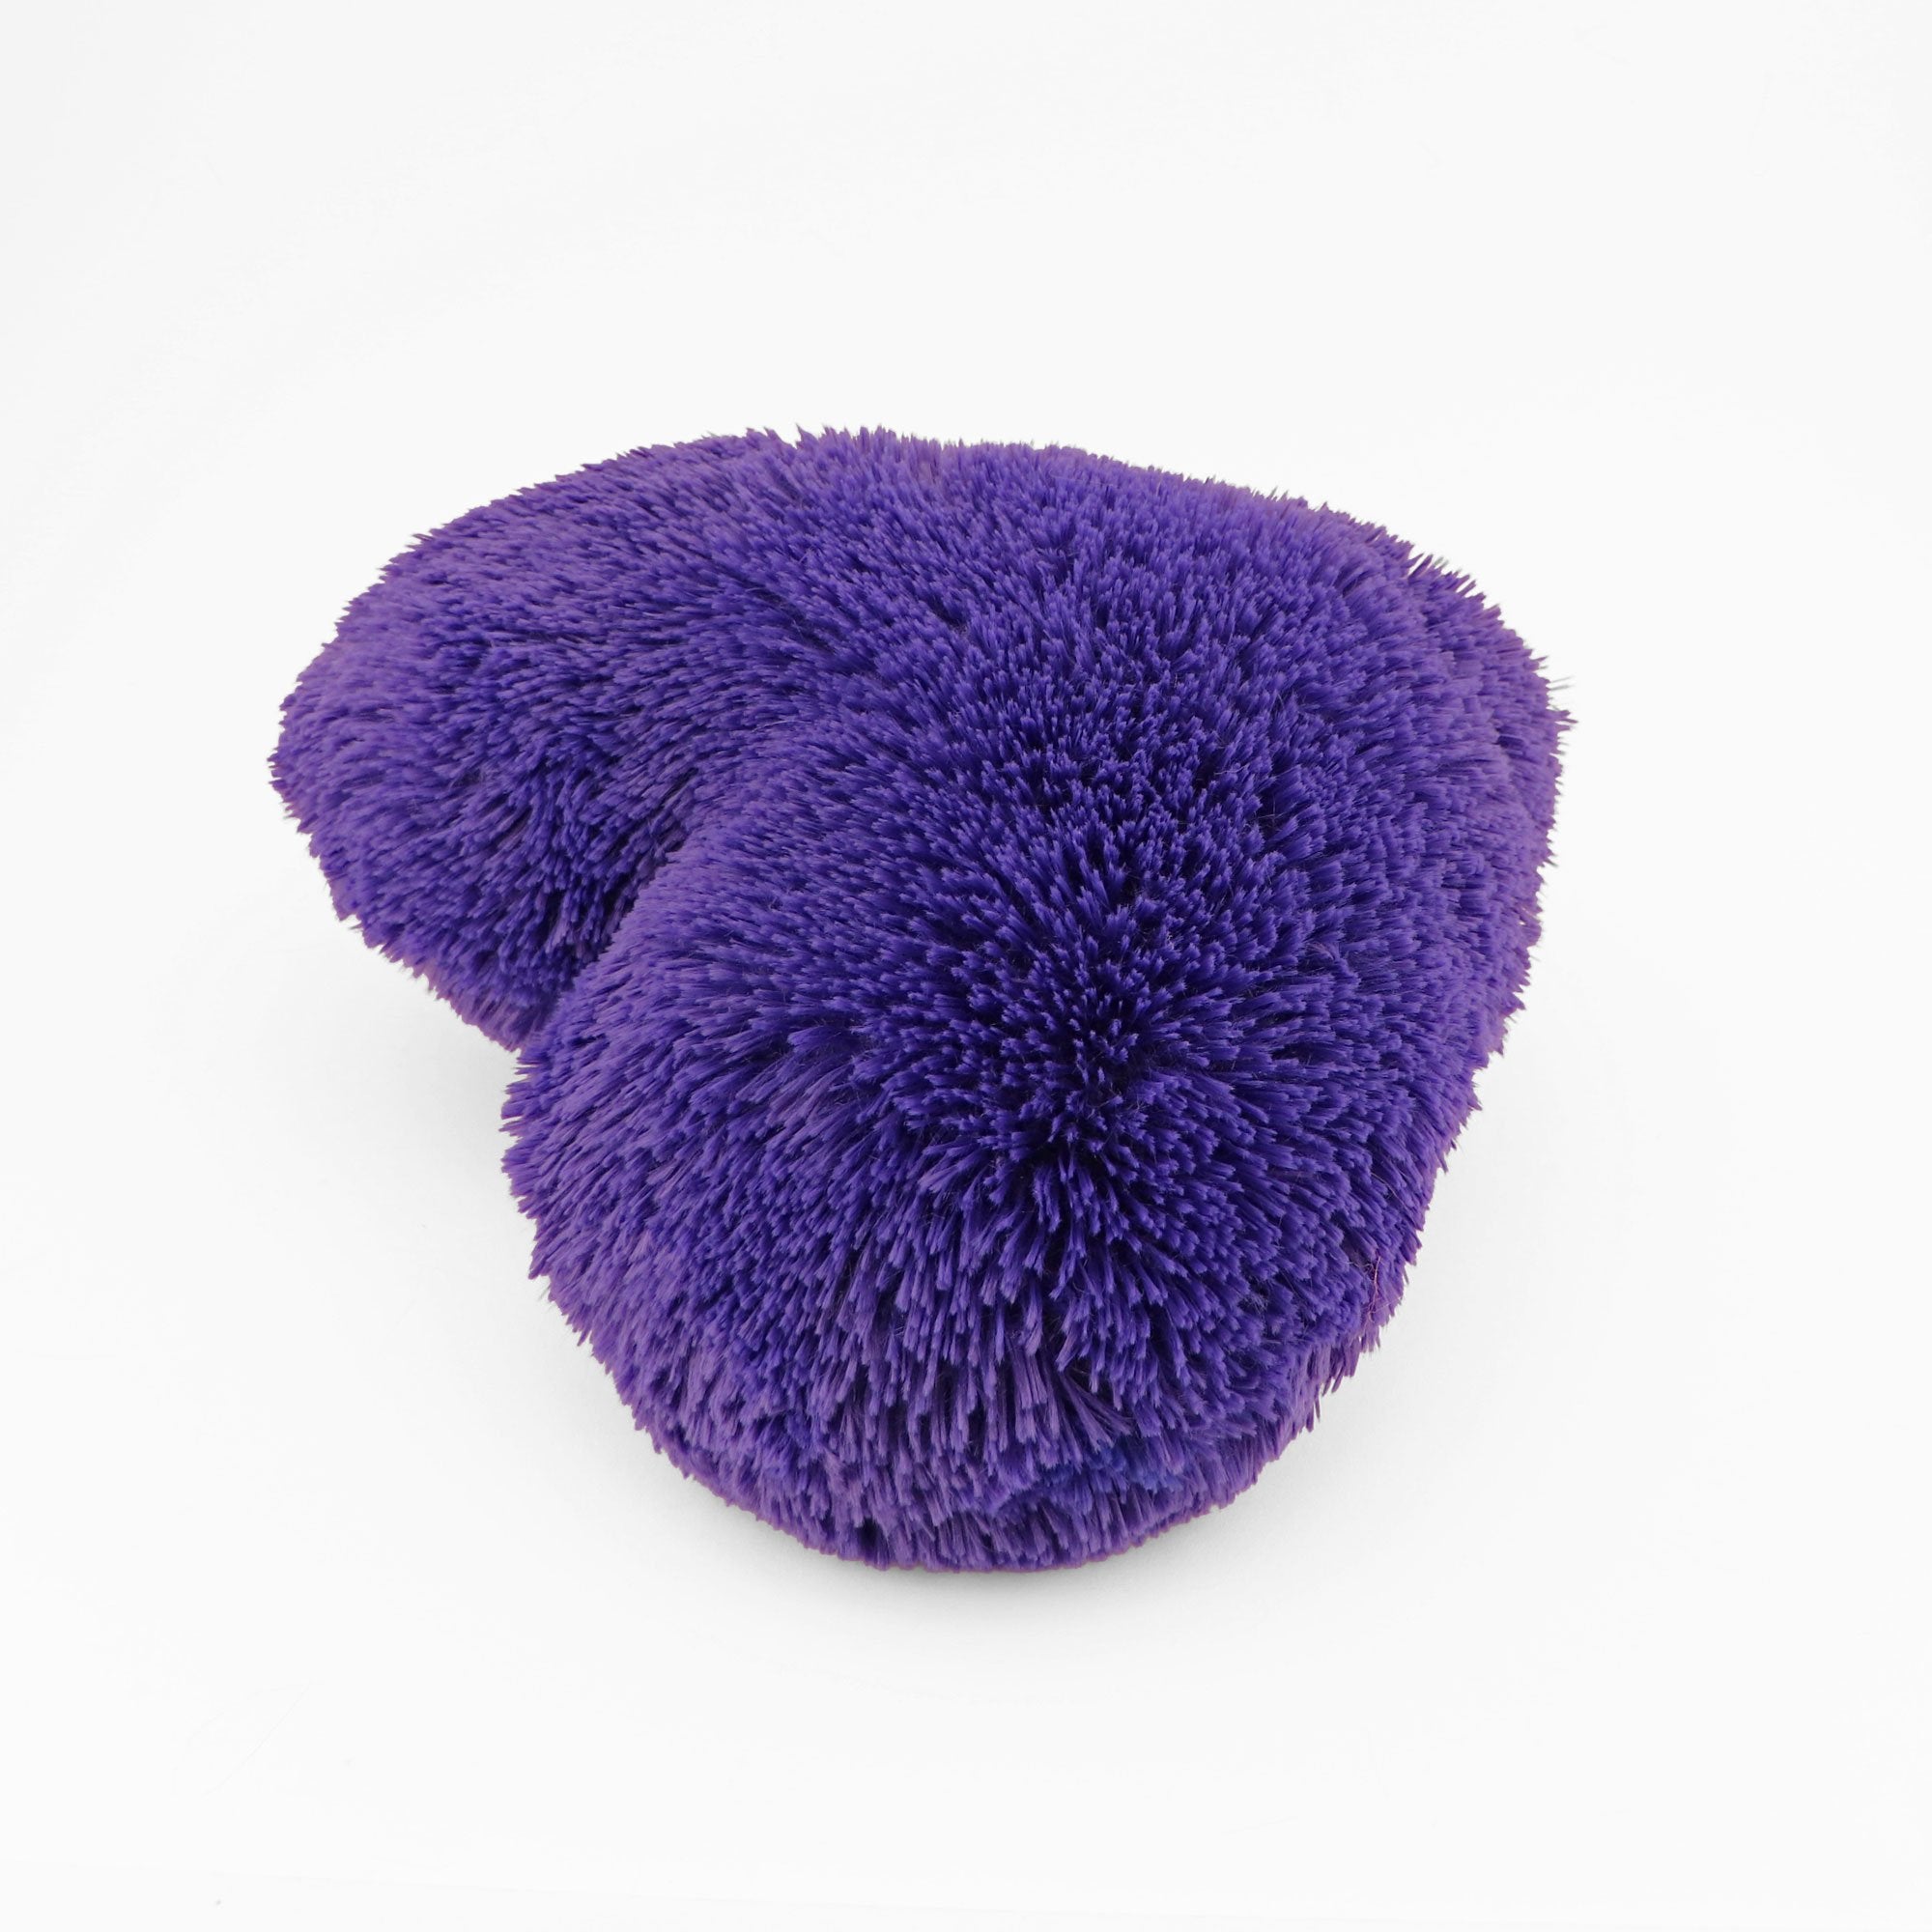 Side view of the Purple heart shaped decorative pillow in fluffy shag material.